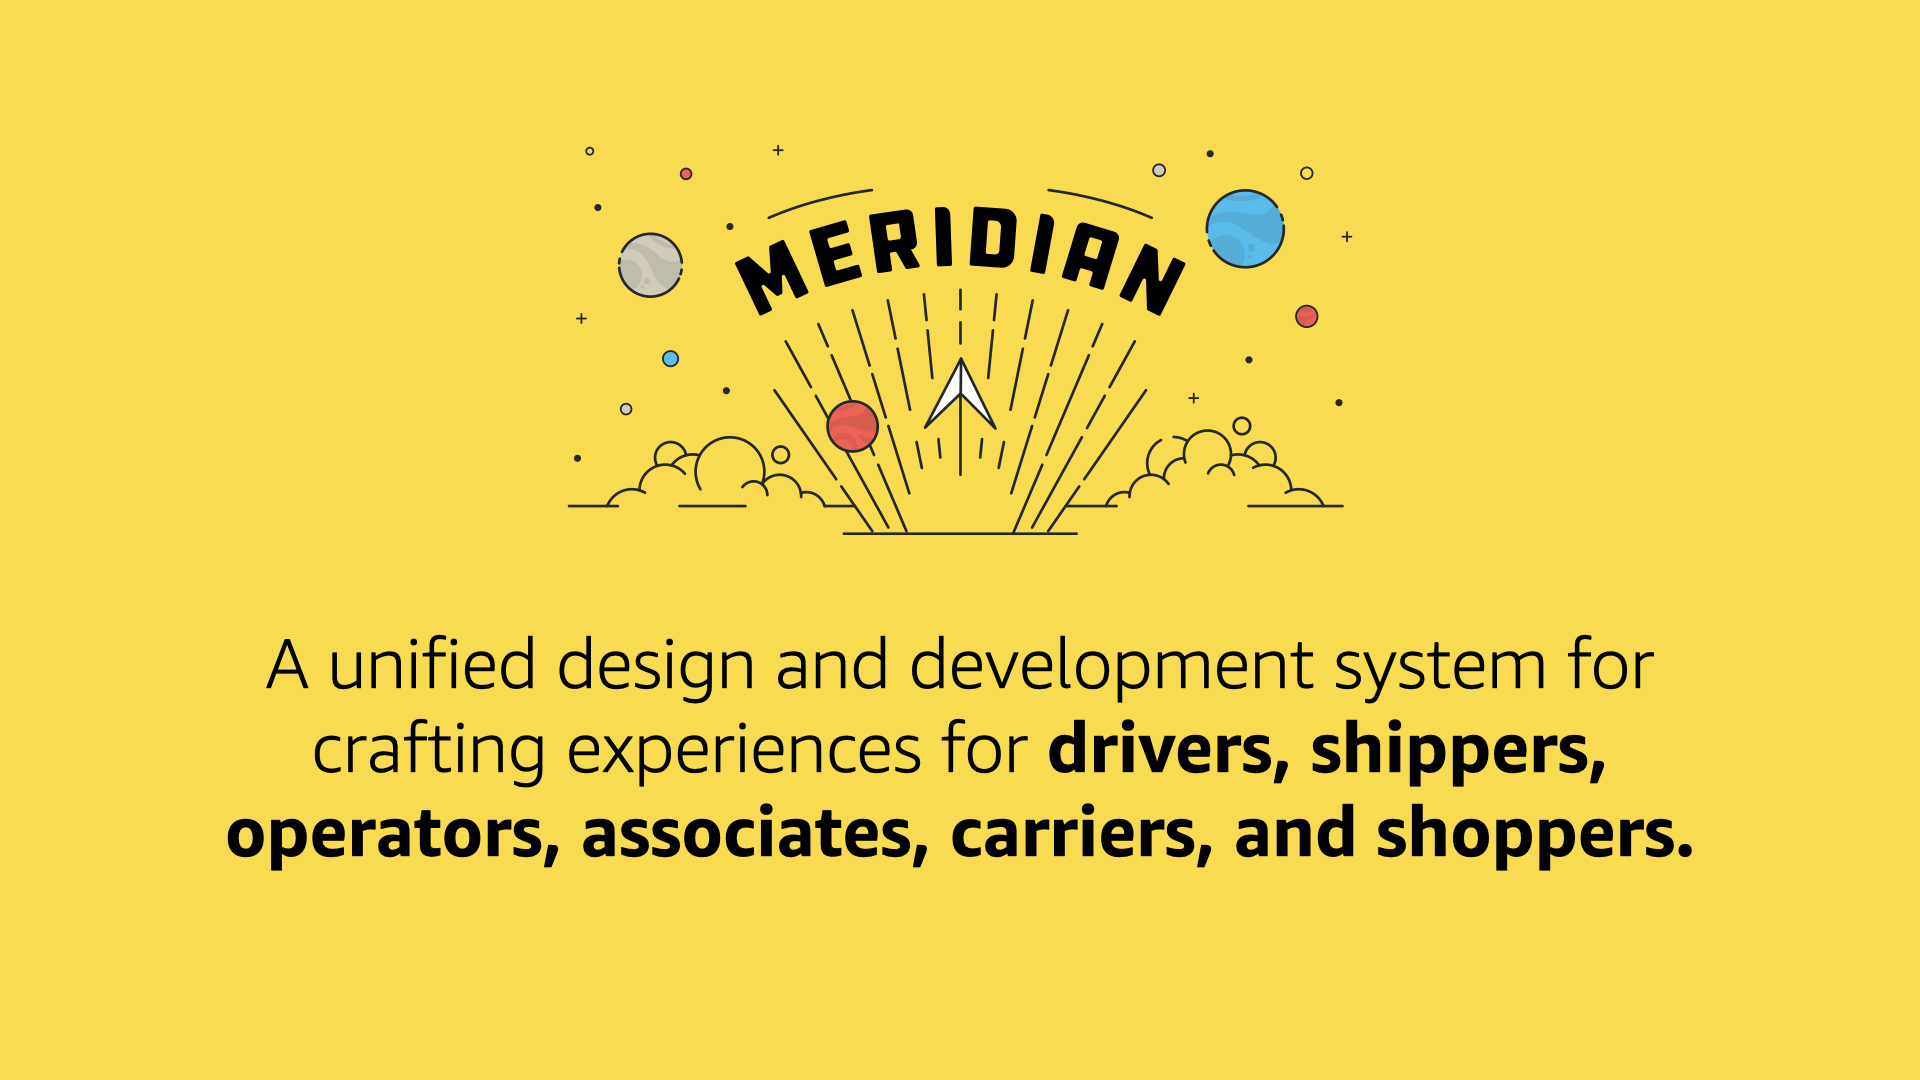 A unified design and development system for crafting experiences.